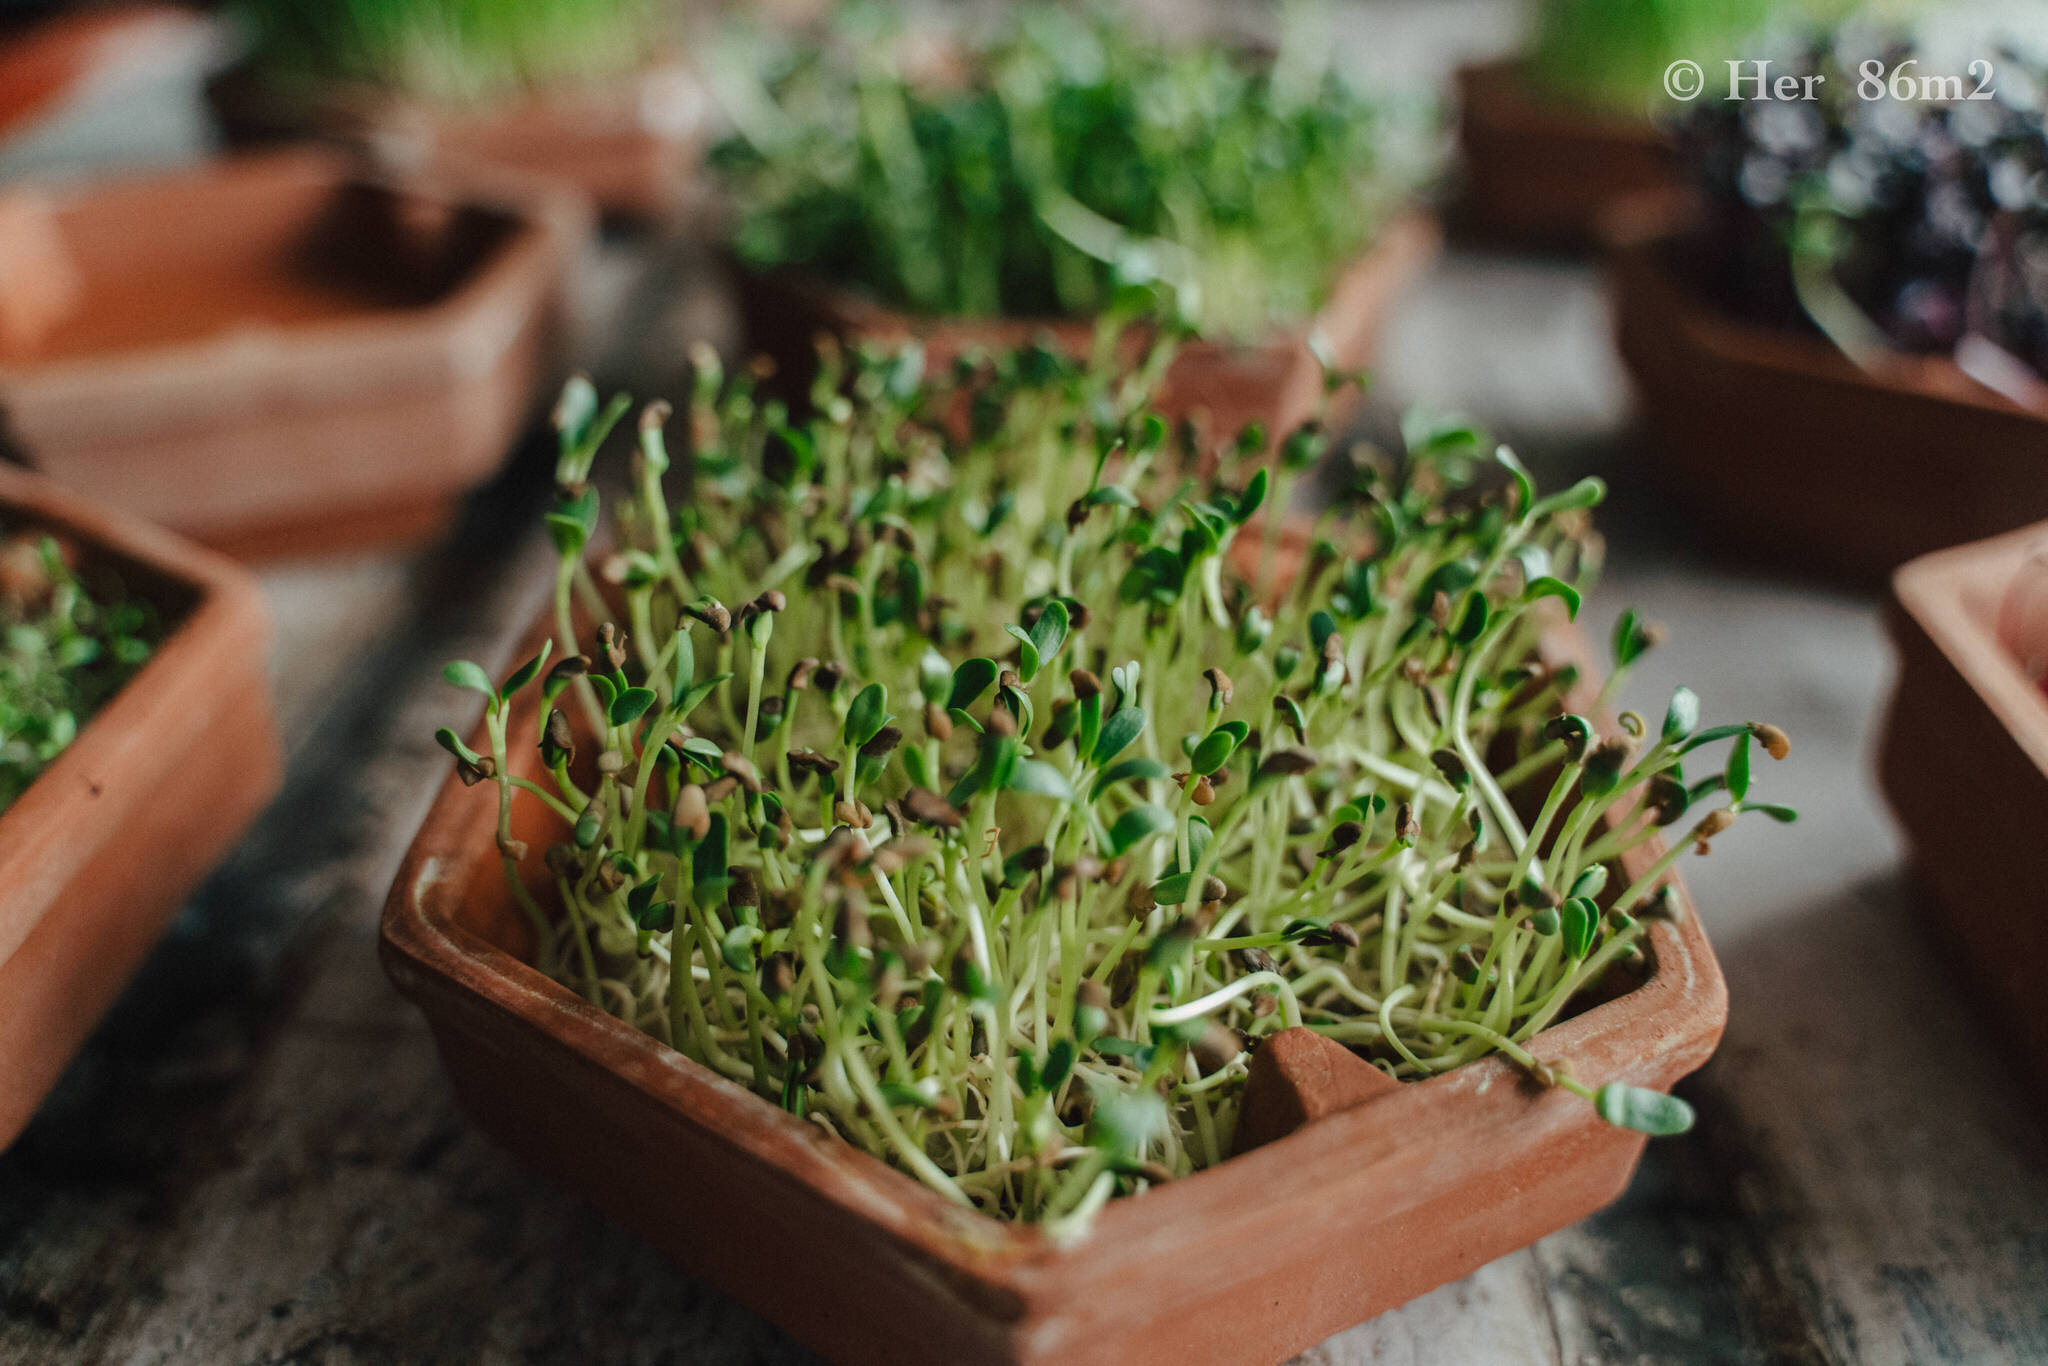 Grow Vegetables Indoors - Microgreens & Sprouts - From Seed to Harvest 29.JPG